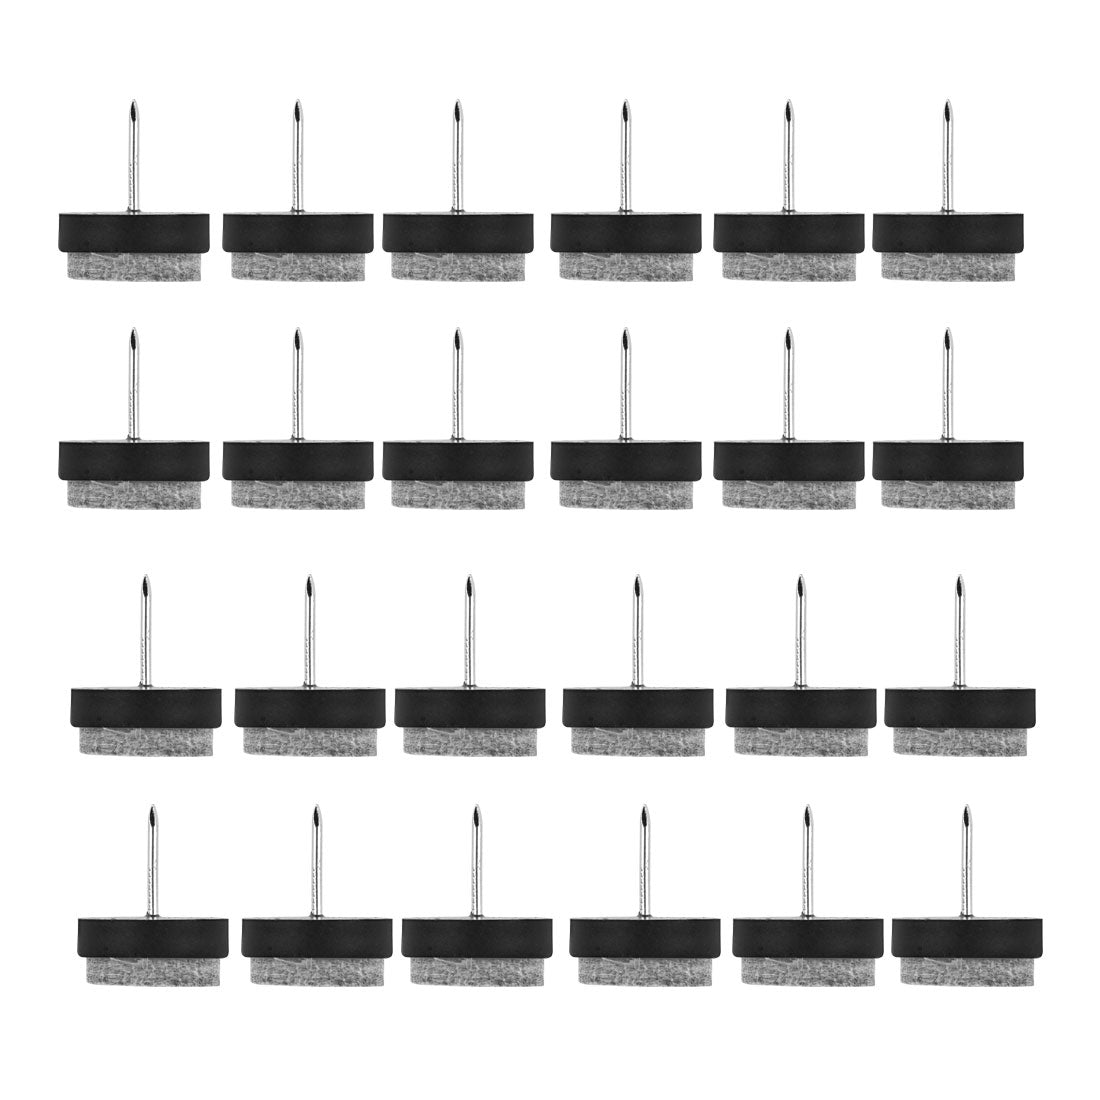 uxcell Uxcell Felt Pad Nails Glides Floor Protector Reduces Noise Anti-scratch Anti-slip for Furniture Chair Table Leg Feet Black 17mm Dia 24pcs